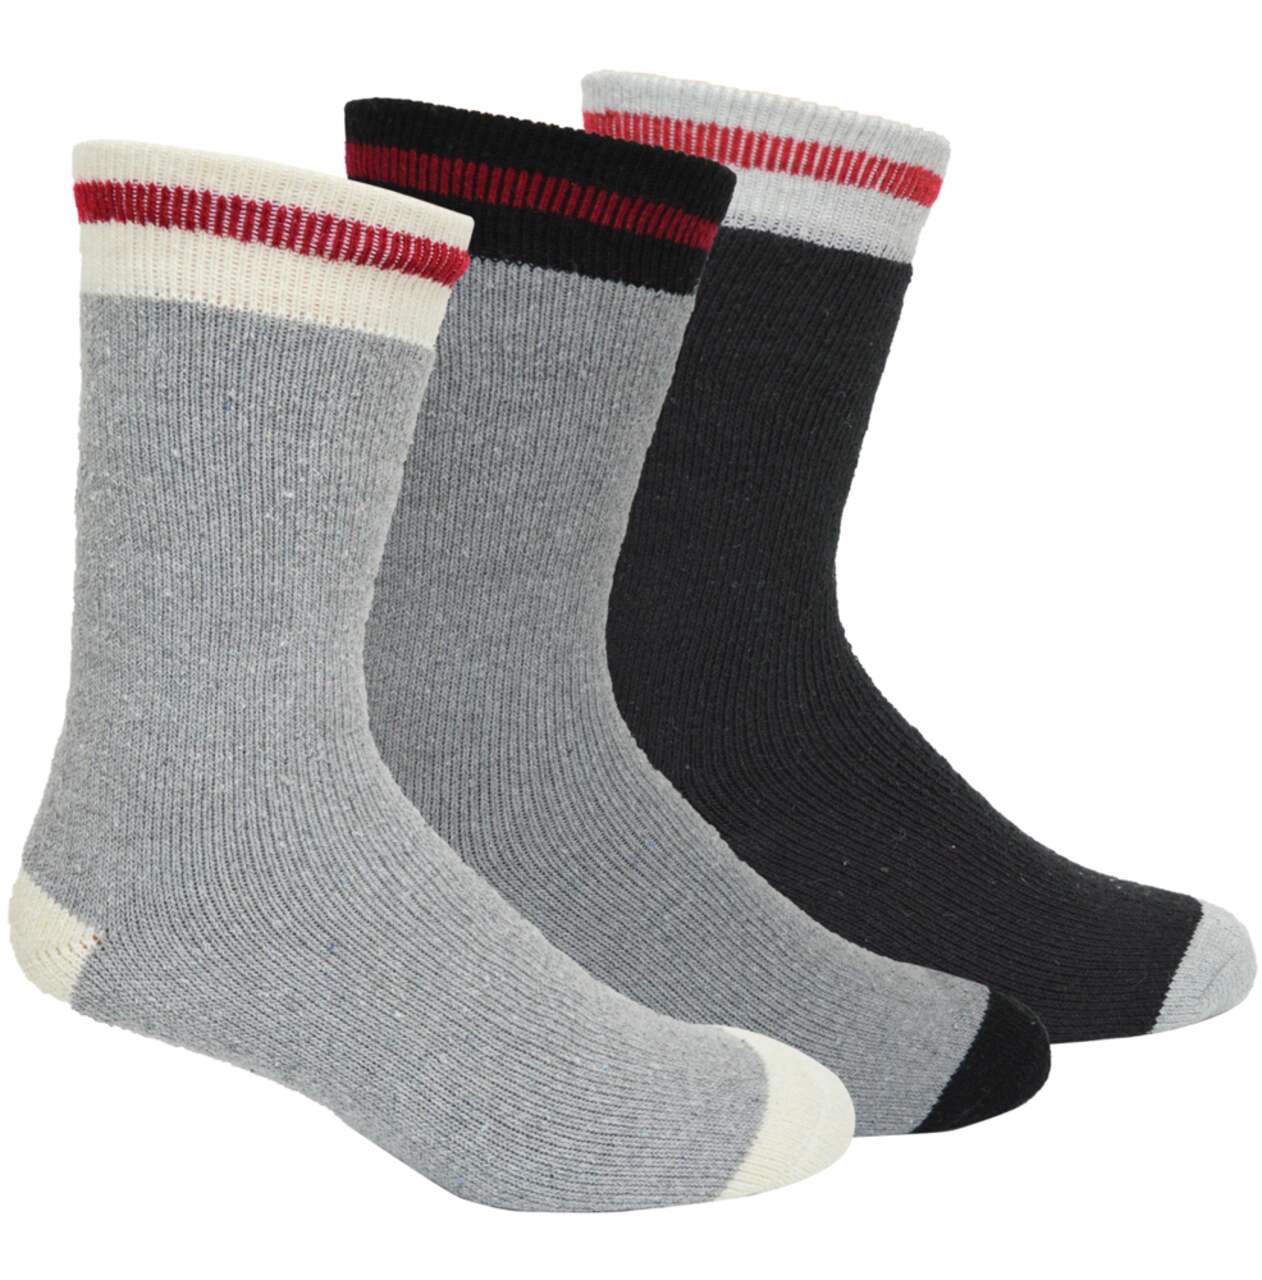 Timberline by Kodiak Men's Thermal Cotton-Blend Socks, Cushioned for  Comfort, 3-pk, Grey